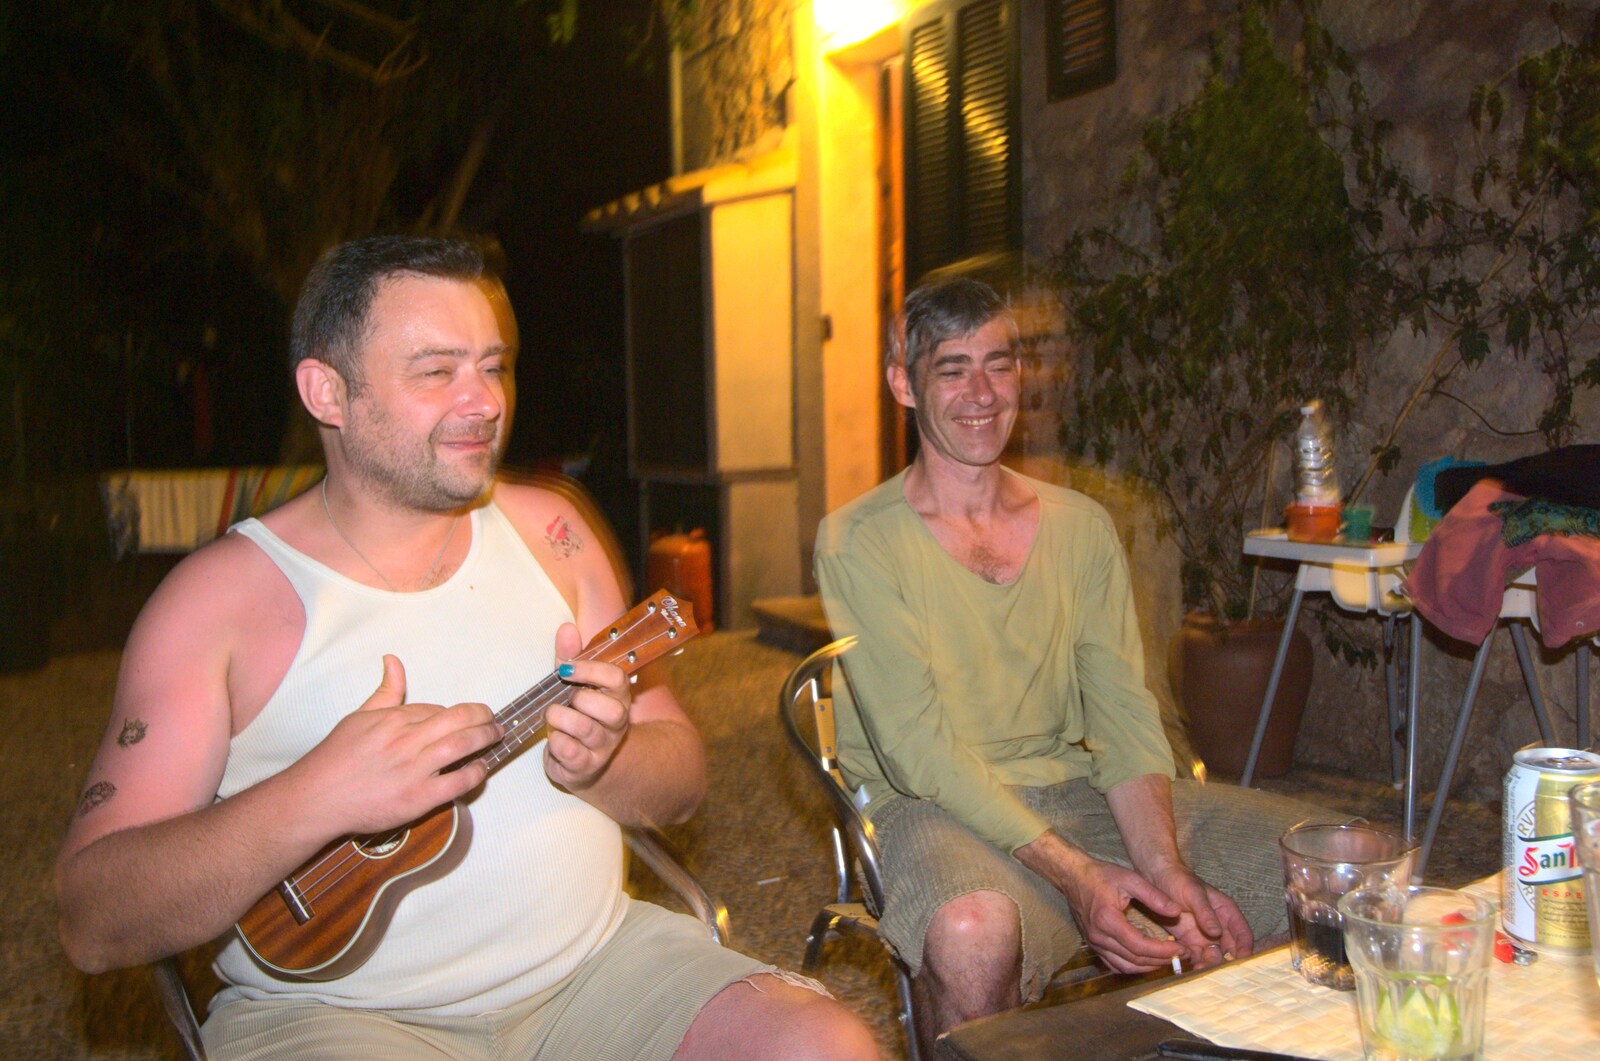 Noddy gets the ukulele out from A Tram Trip to Port Soller, Mallorca - 18th August 2011